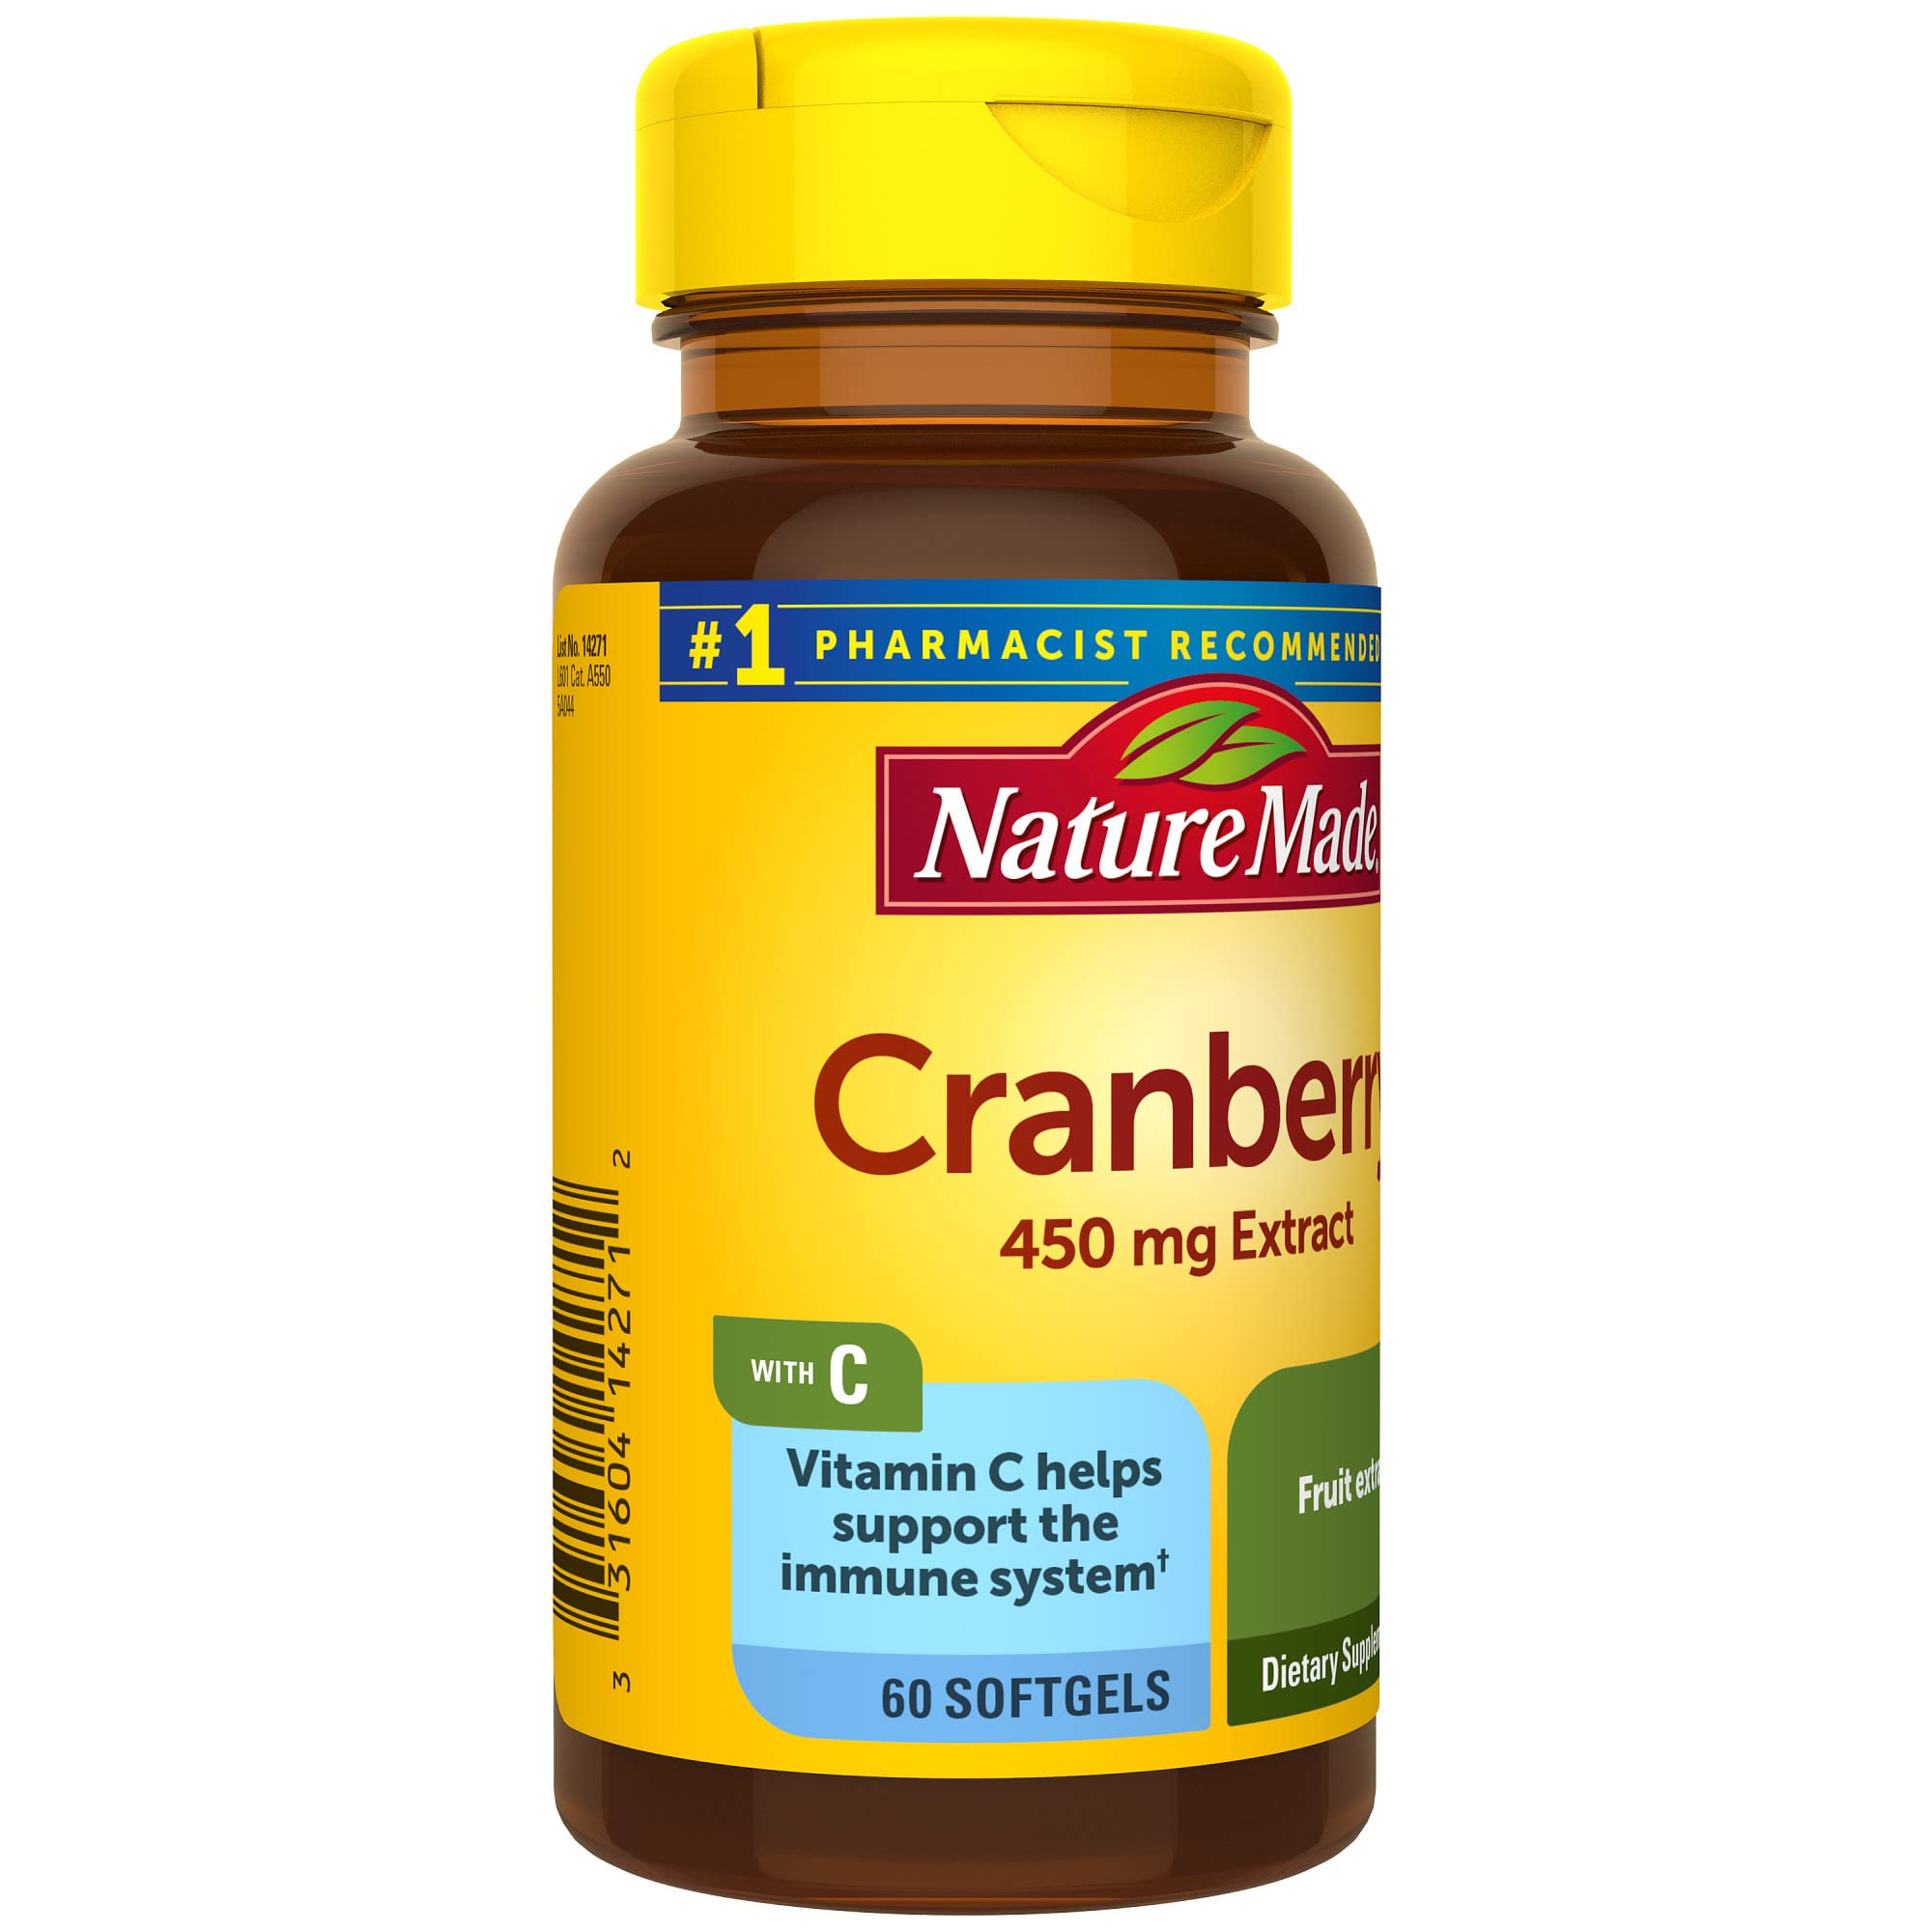 Nature Made Cranberry with Vitamin C, Dietary Supplement for Immune and Antioxidant Support, 60 Softgels, 30 Day Supply (Pack of 2)